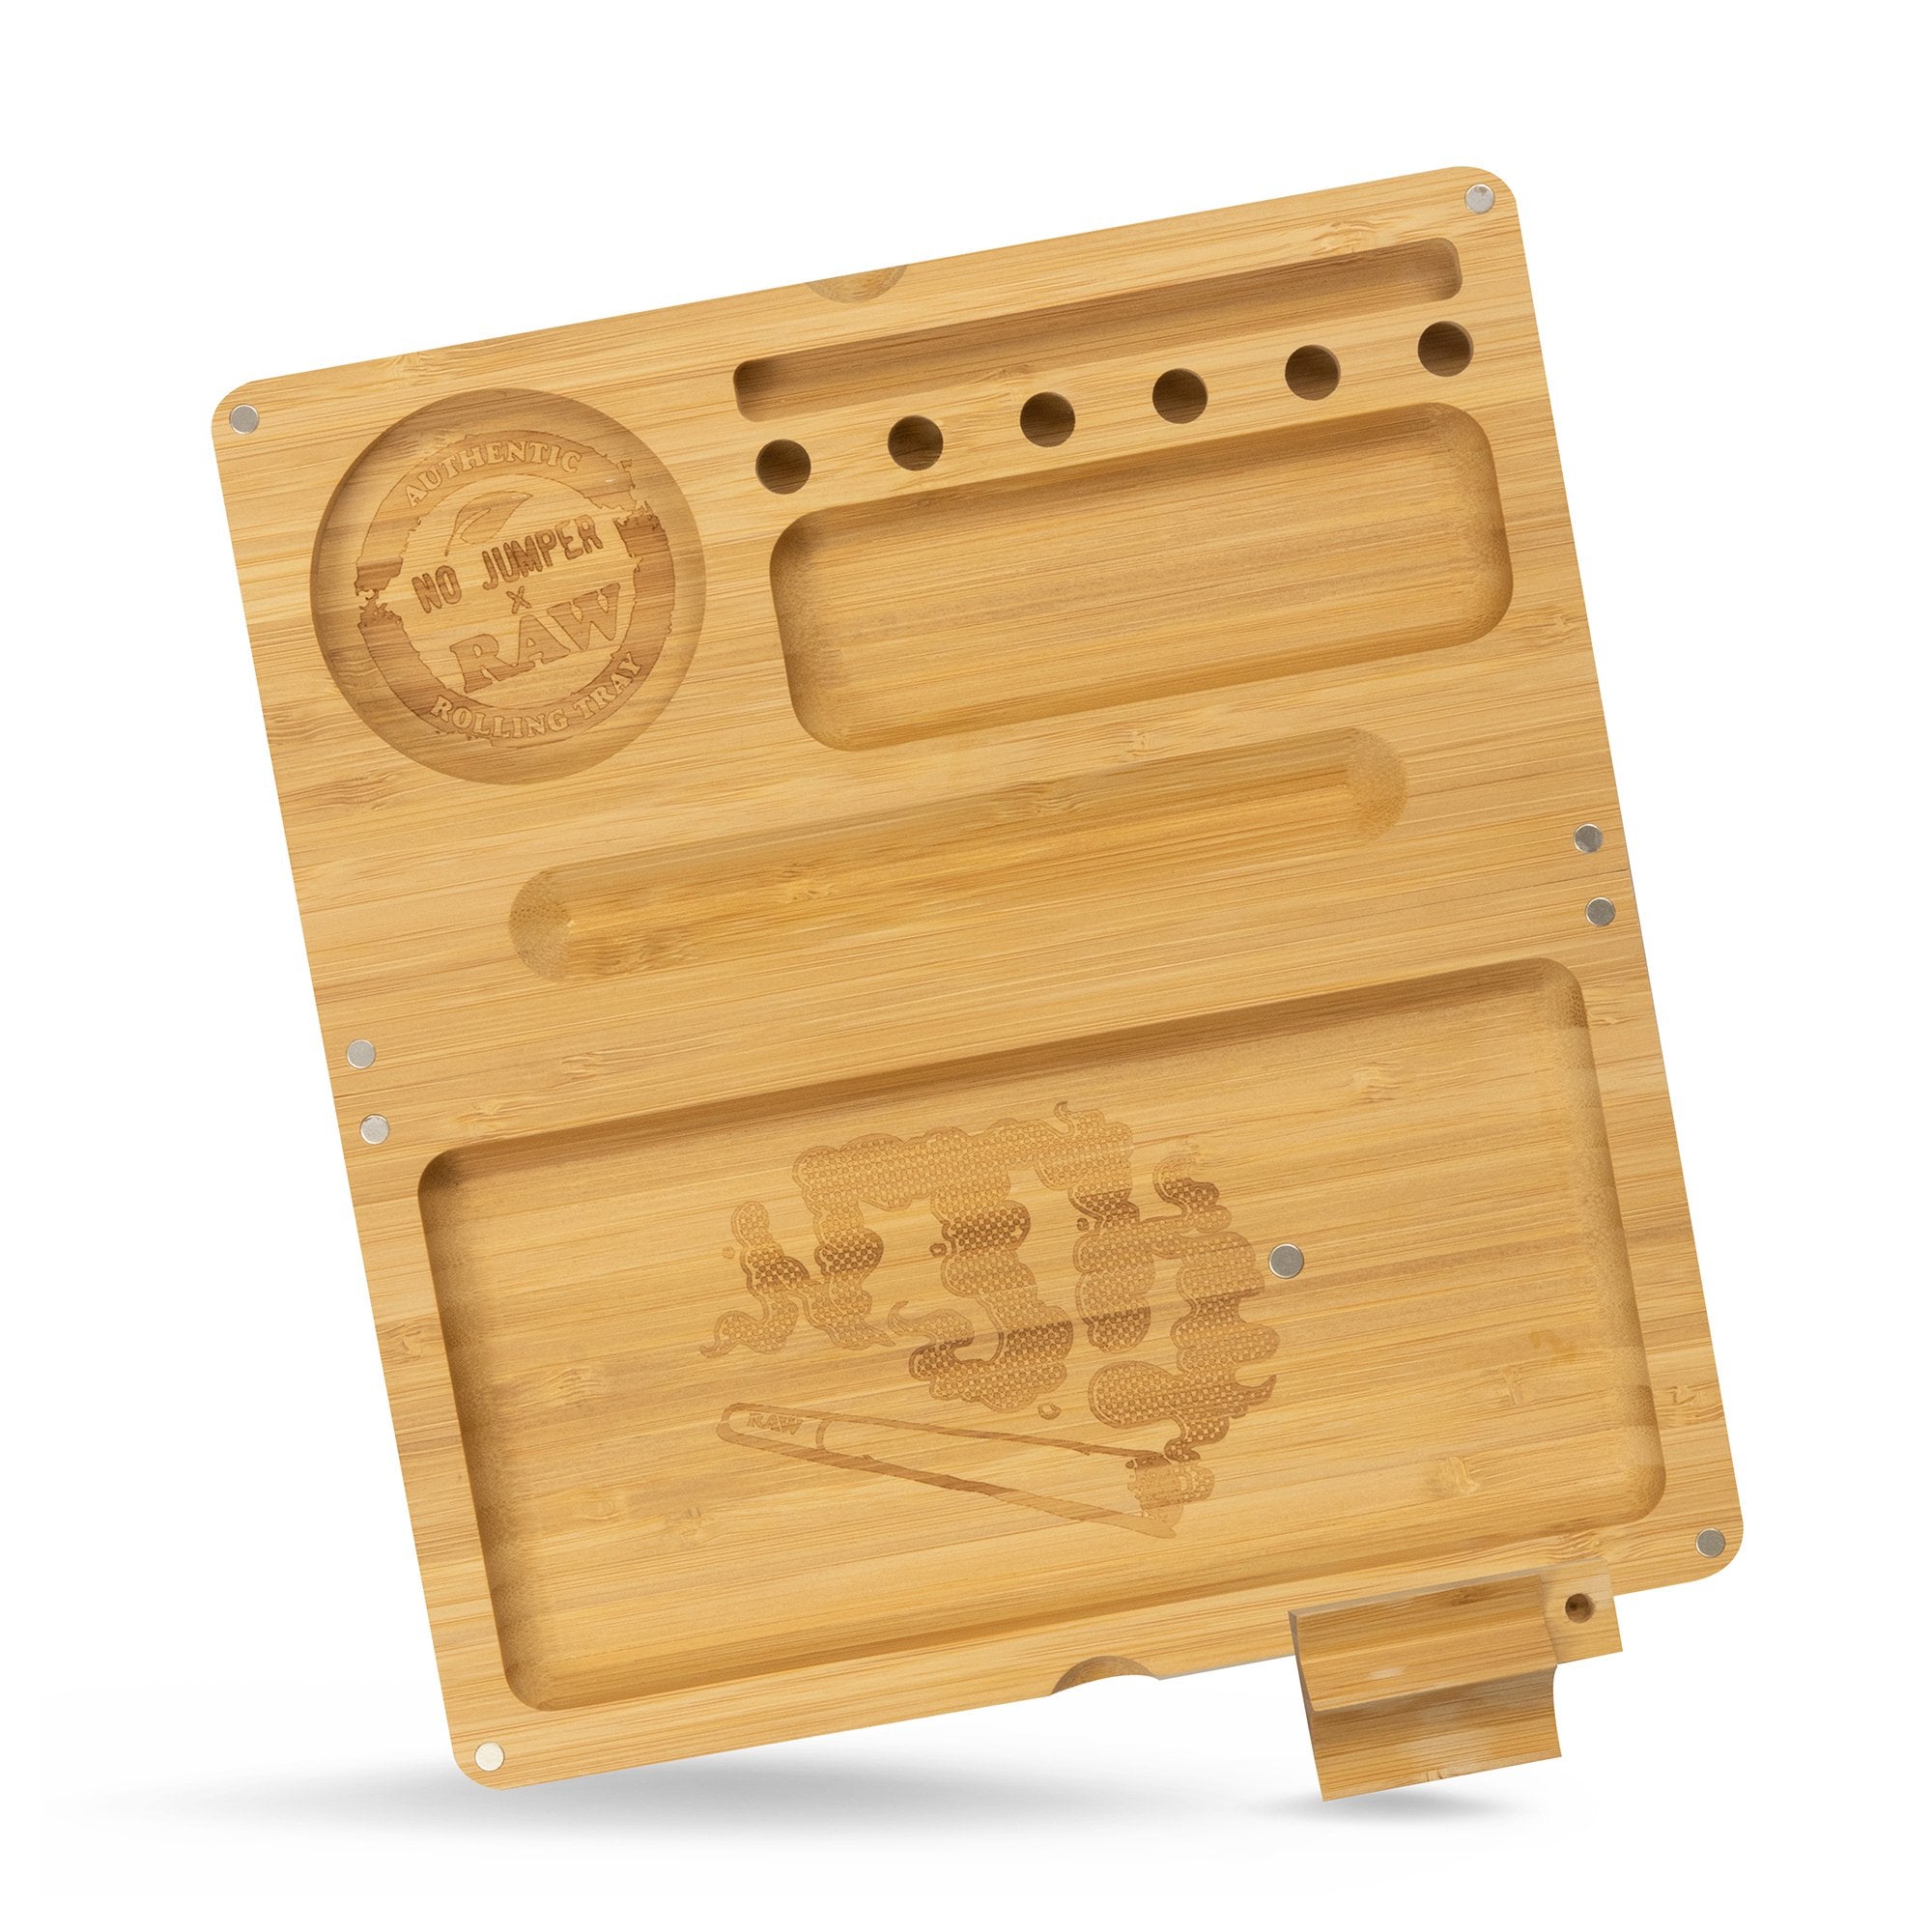 RAW X No Jumper Backflip Bamboo Rolling Tray Rolling Trays WAR00155-MUSA01 esd-official